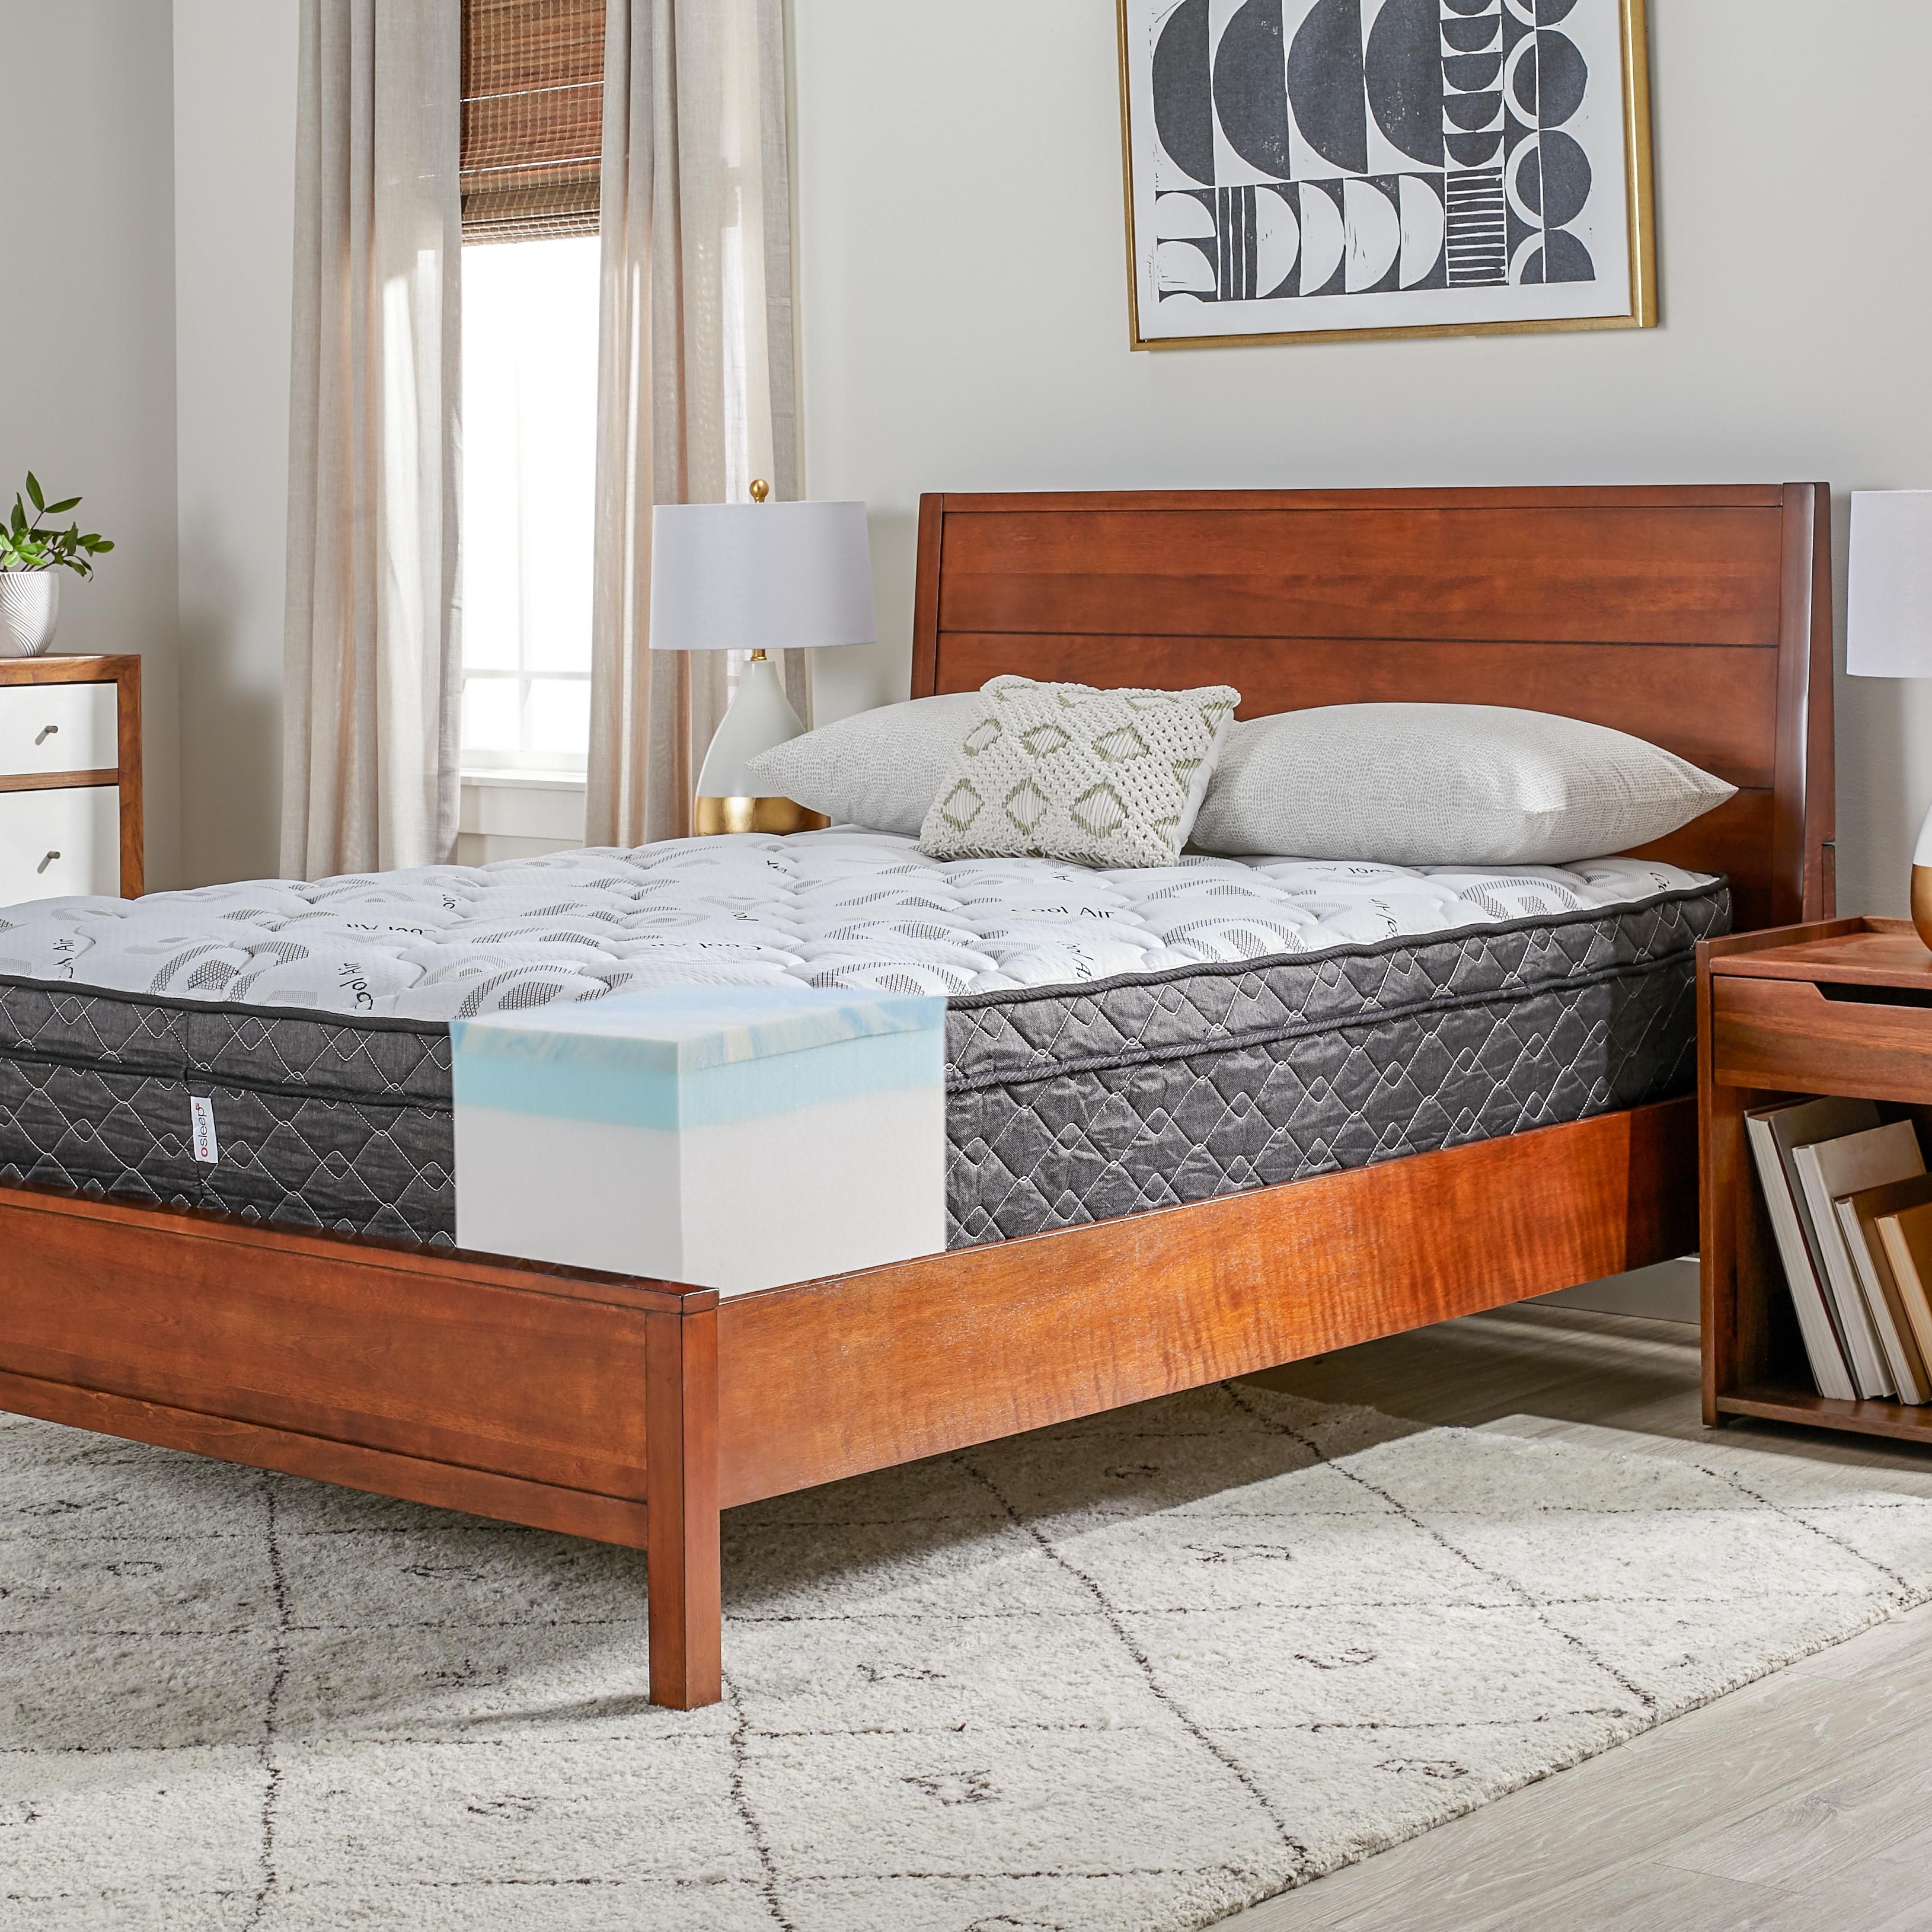 save an extra 20% on Select Mattresses*